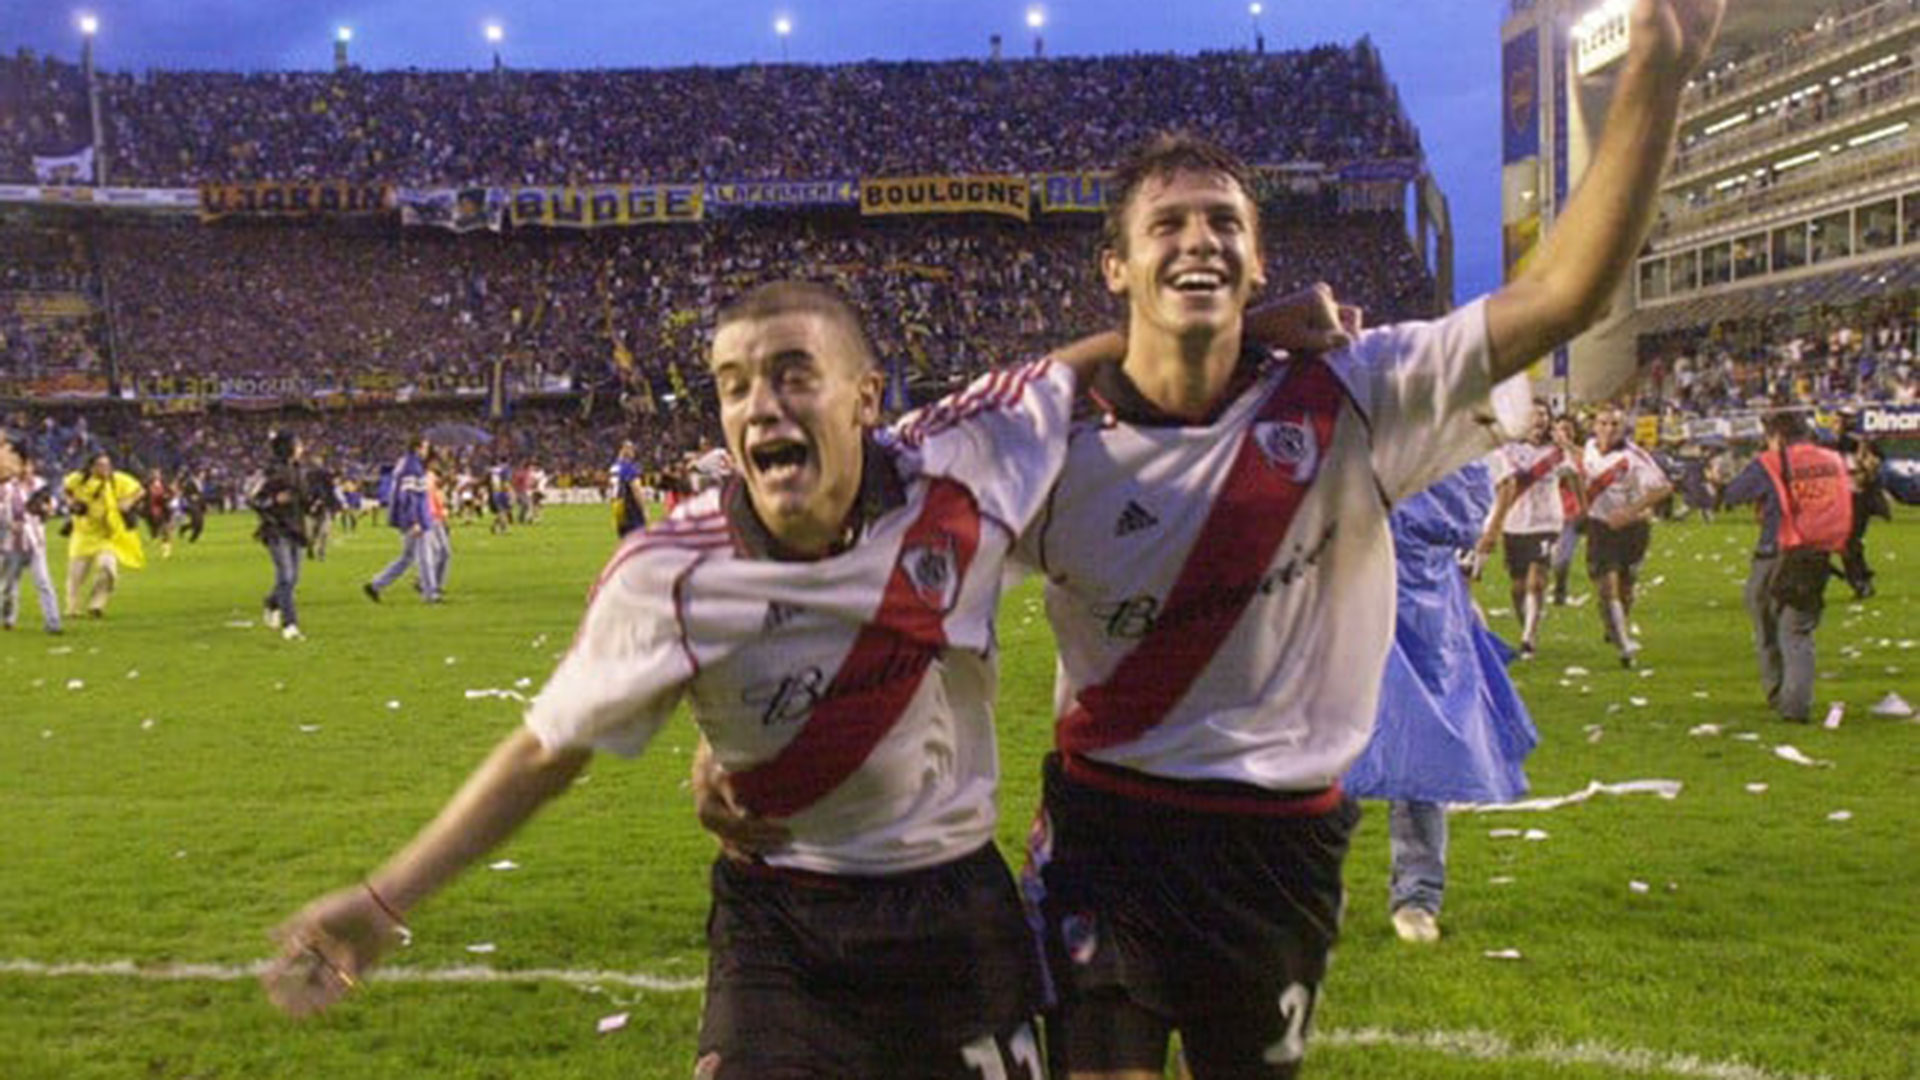 D'Alessandro and Demichelis, after a Superclásico win against Boca Juniors in the Bombonera